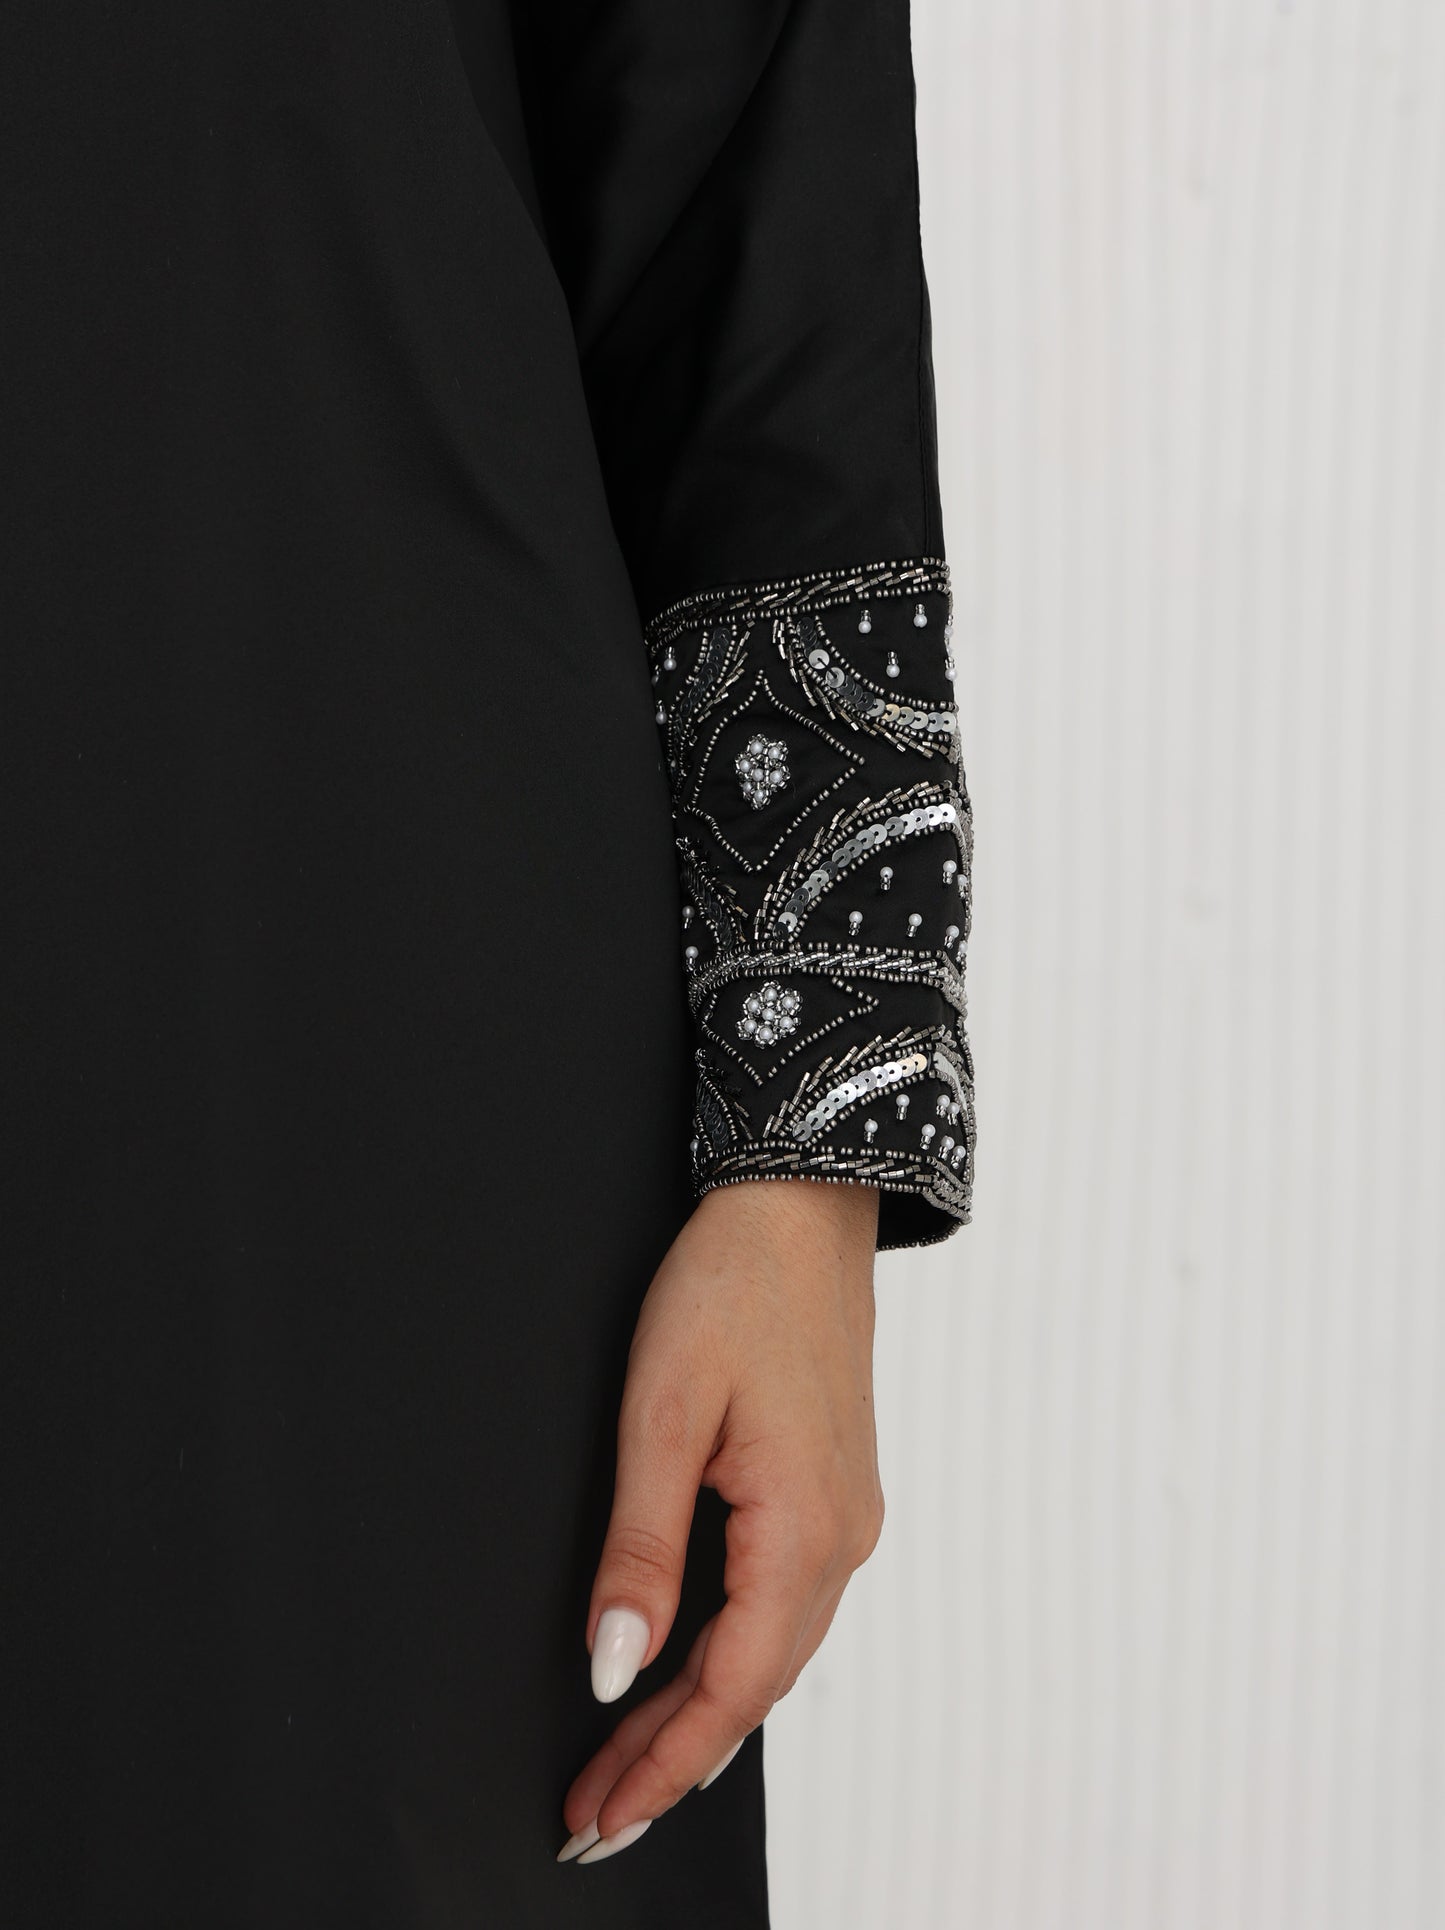 Black Bridal Satin Abaya with hand embroidery Detailing on sleeves